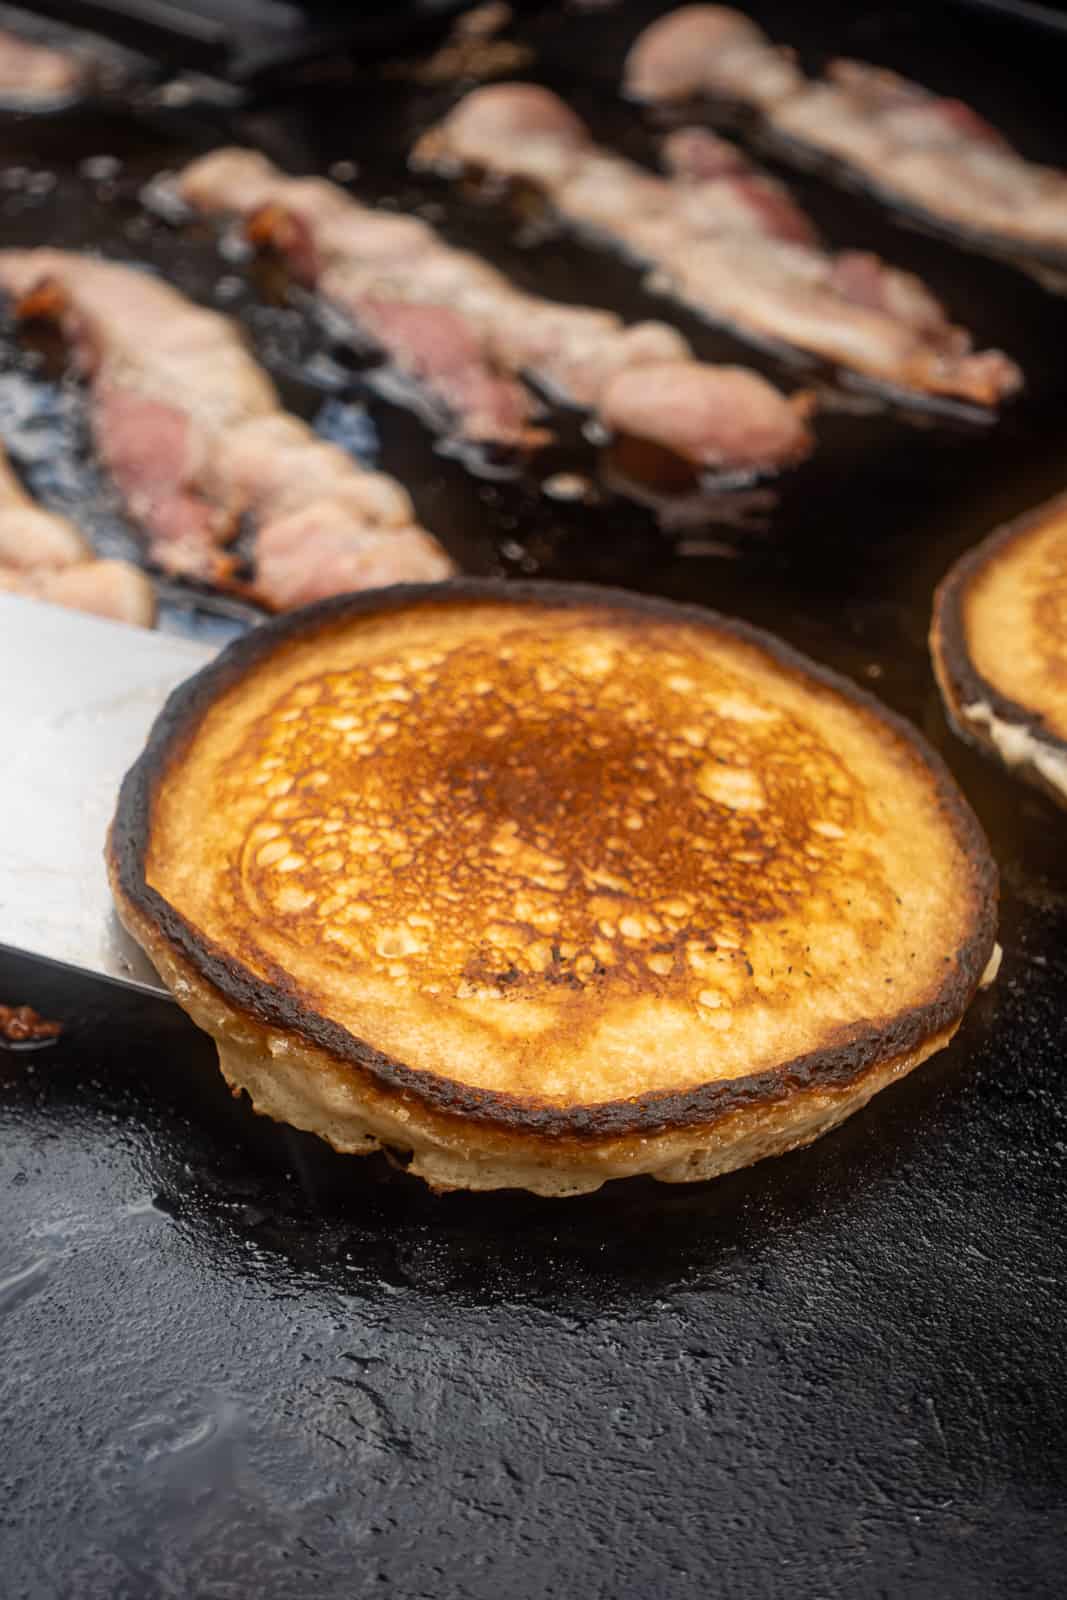 Cooking pancakes on the griddle Flatrock Grill from Traeger with bacon